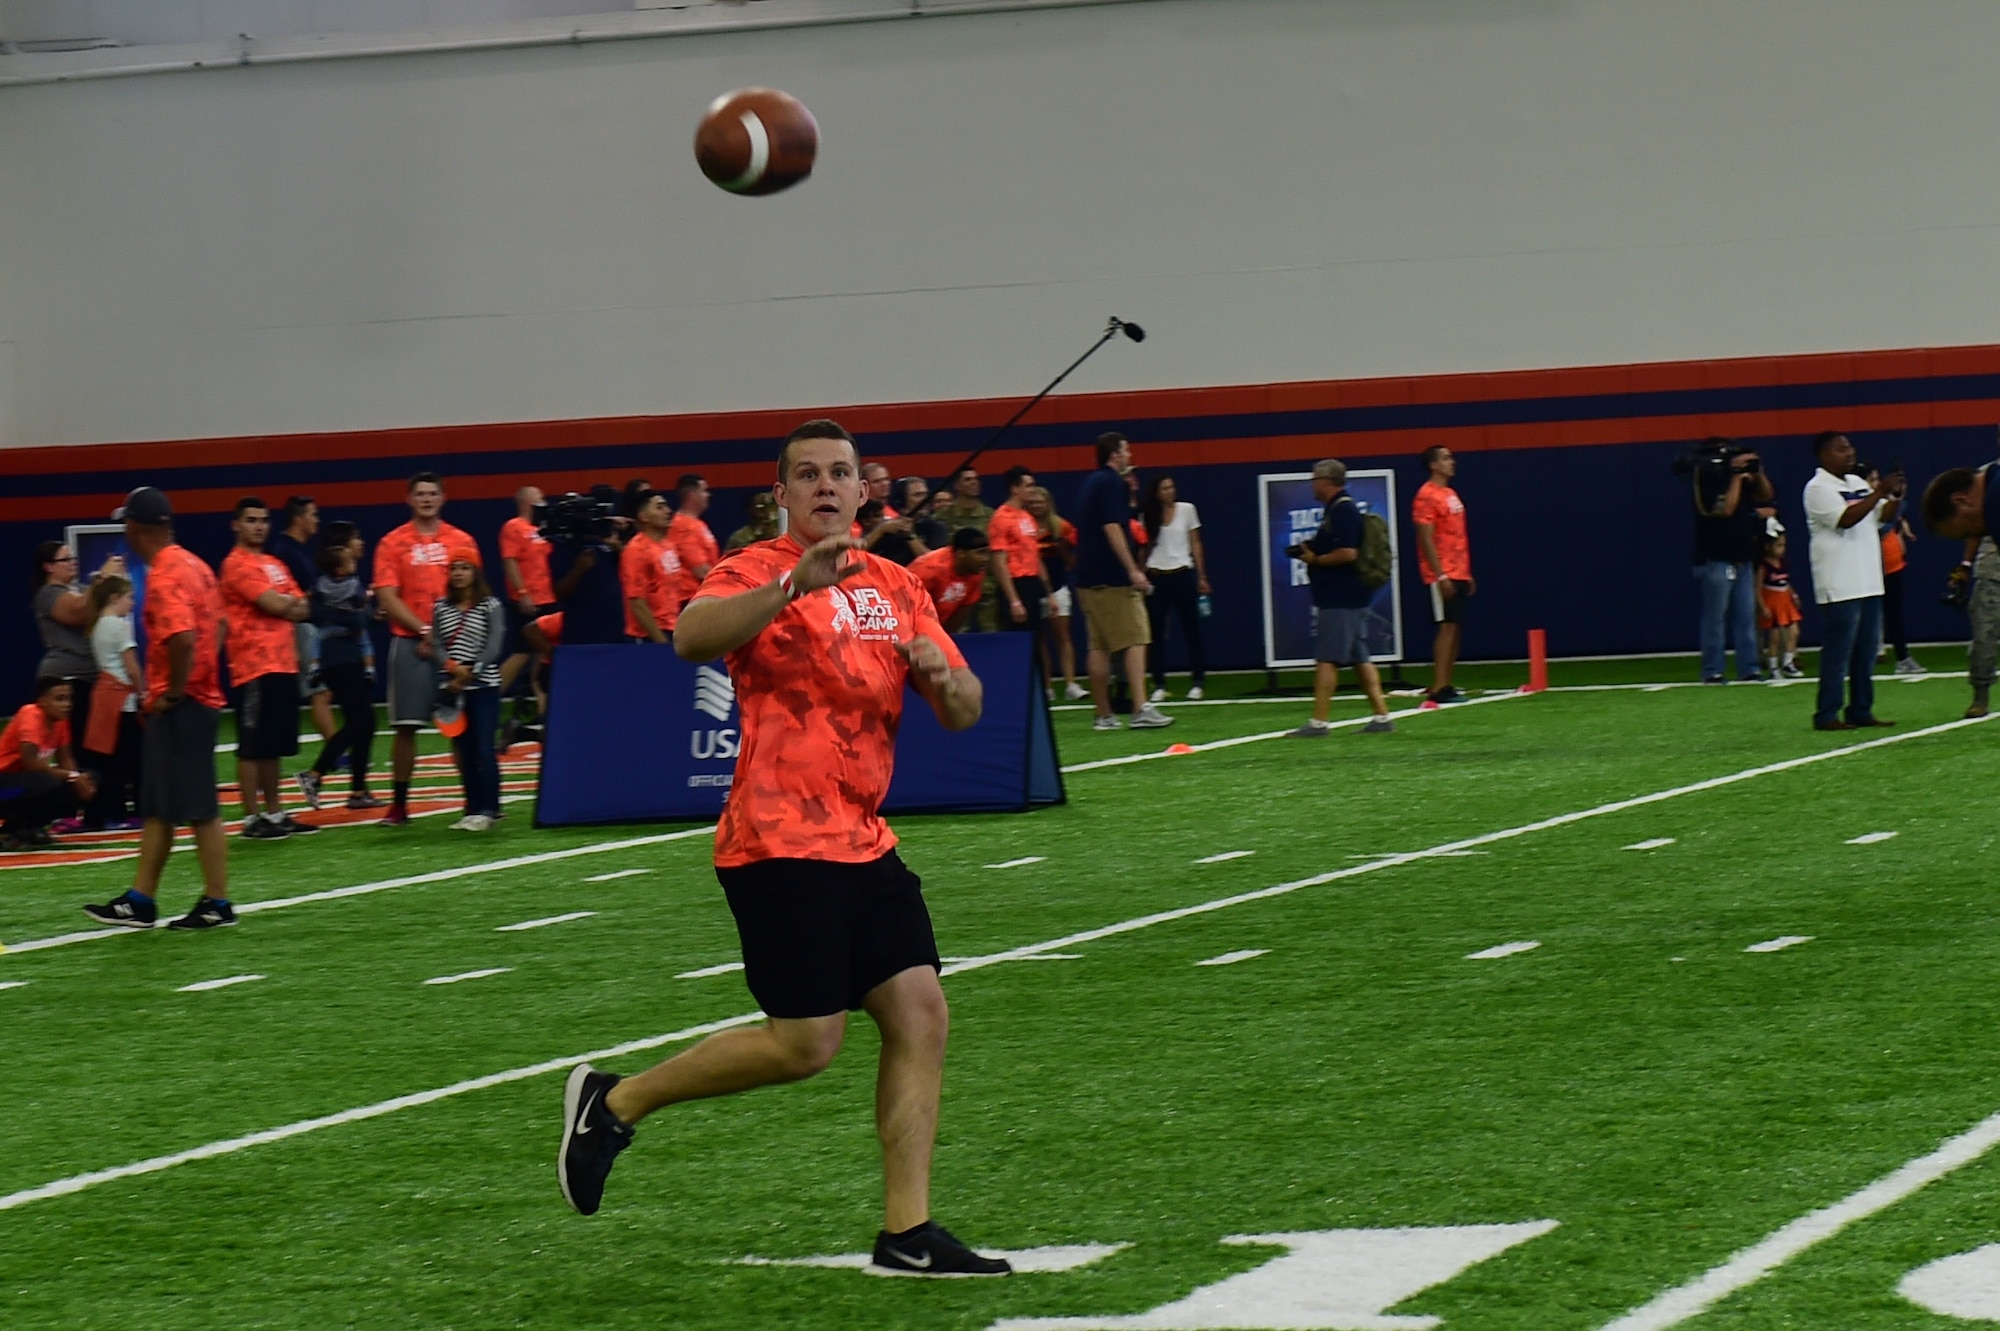 2nd Lt. Colin Wolff, 460th Space Wing space operations officer, catches a football during the team ball catching portion of a military training camp at the Denver Broncos’ University of Colorado Health Training Center Fieldhouse in Englewood, Colo., August 25, 2016.  Team Buckley won the military camp competition after participating in five head-to-head challenges including: team ball catching, a gauntlet, tackling dummy relay, sled push and the kneeling power ball launch. (U.S. Air Force photo by Airman 1st Class Gabrielle Spradling/Released)